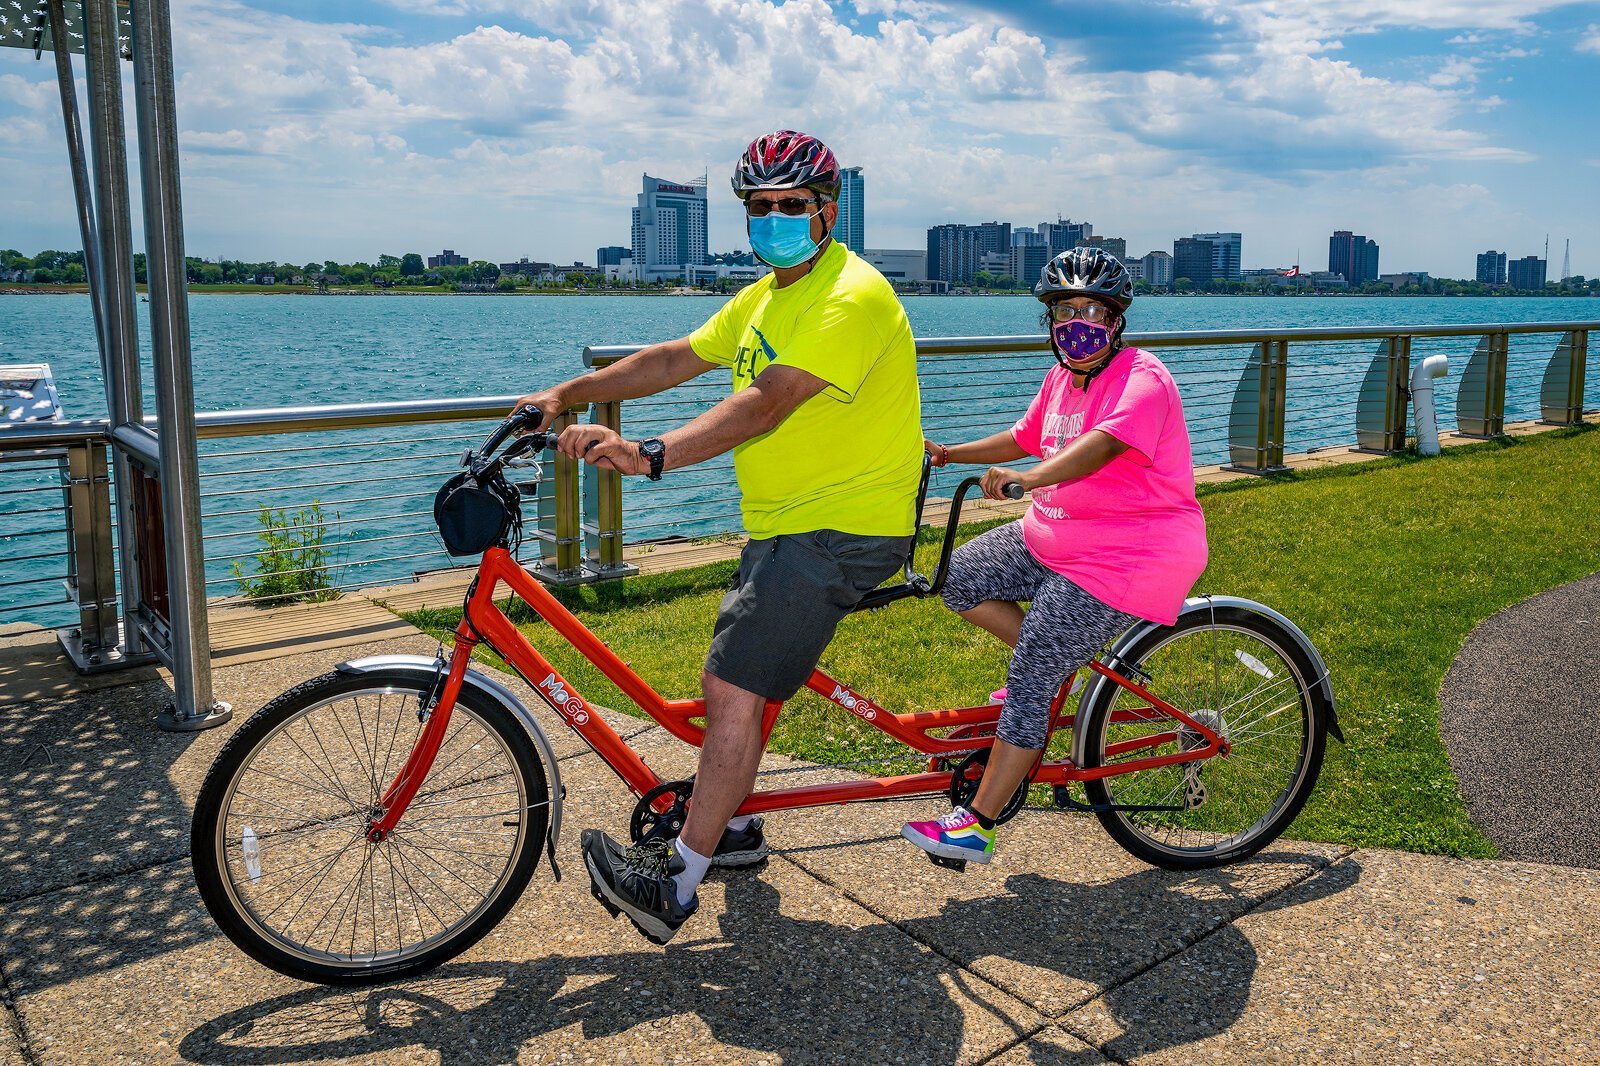 PEAC founder John Waterman and PEAC student Tiara Sims on a MoGo adaptive cycle on the Detroit Riverwalk.